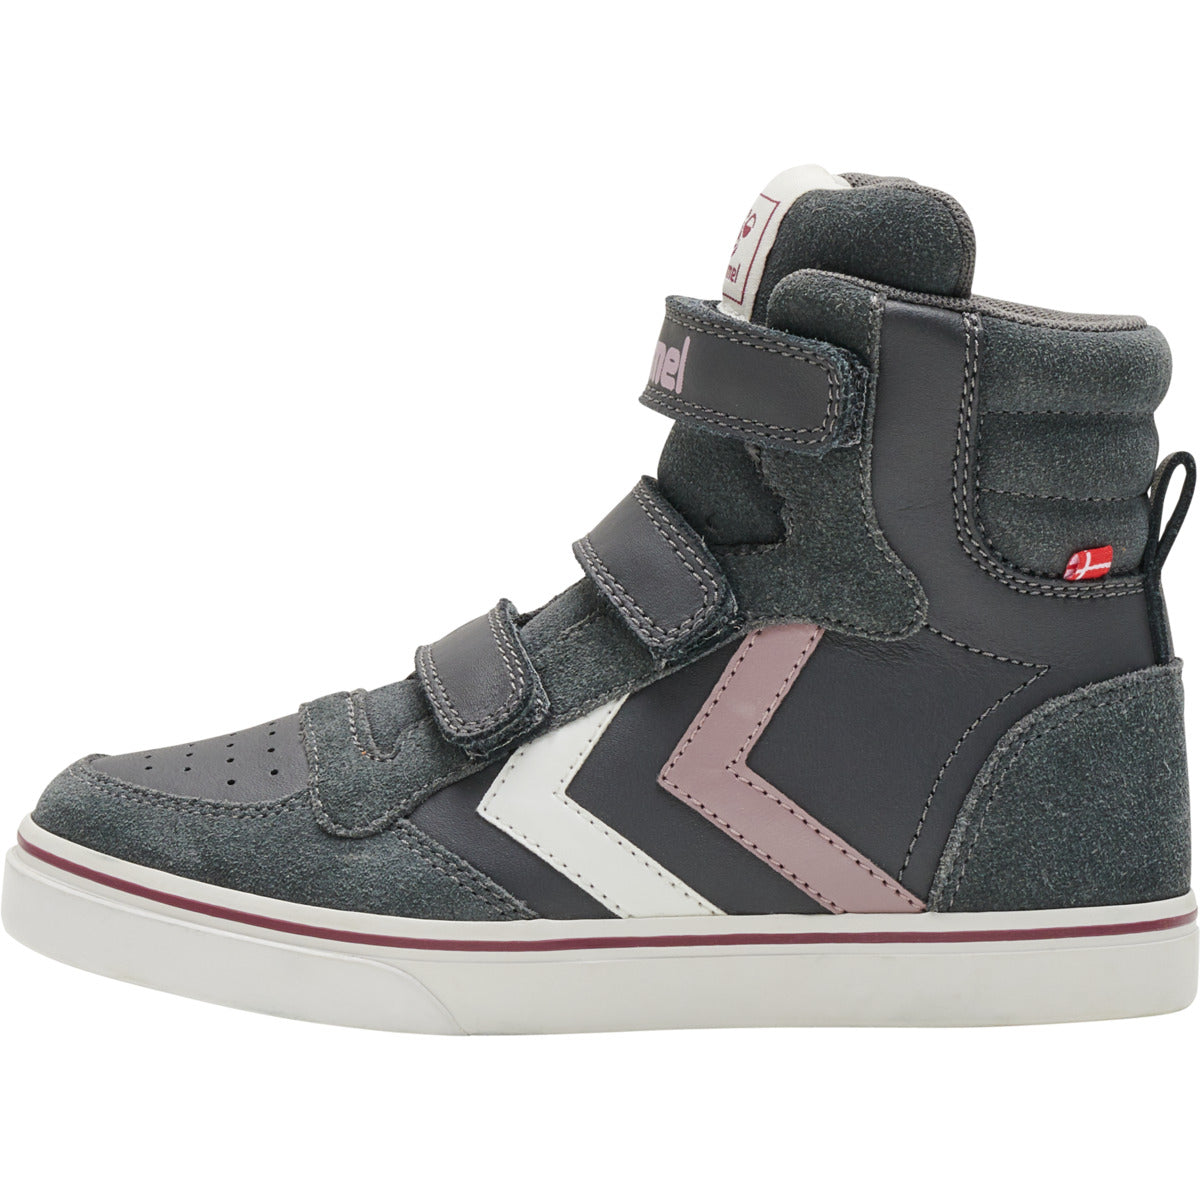 Hummel Stadil Pro Junior High top Leather Trainers